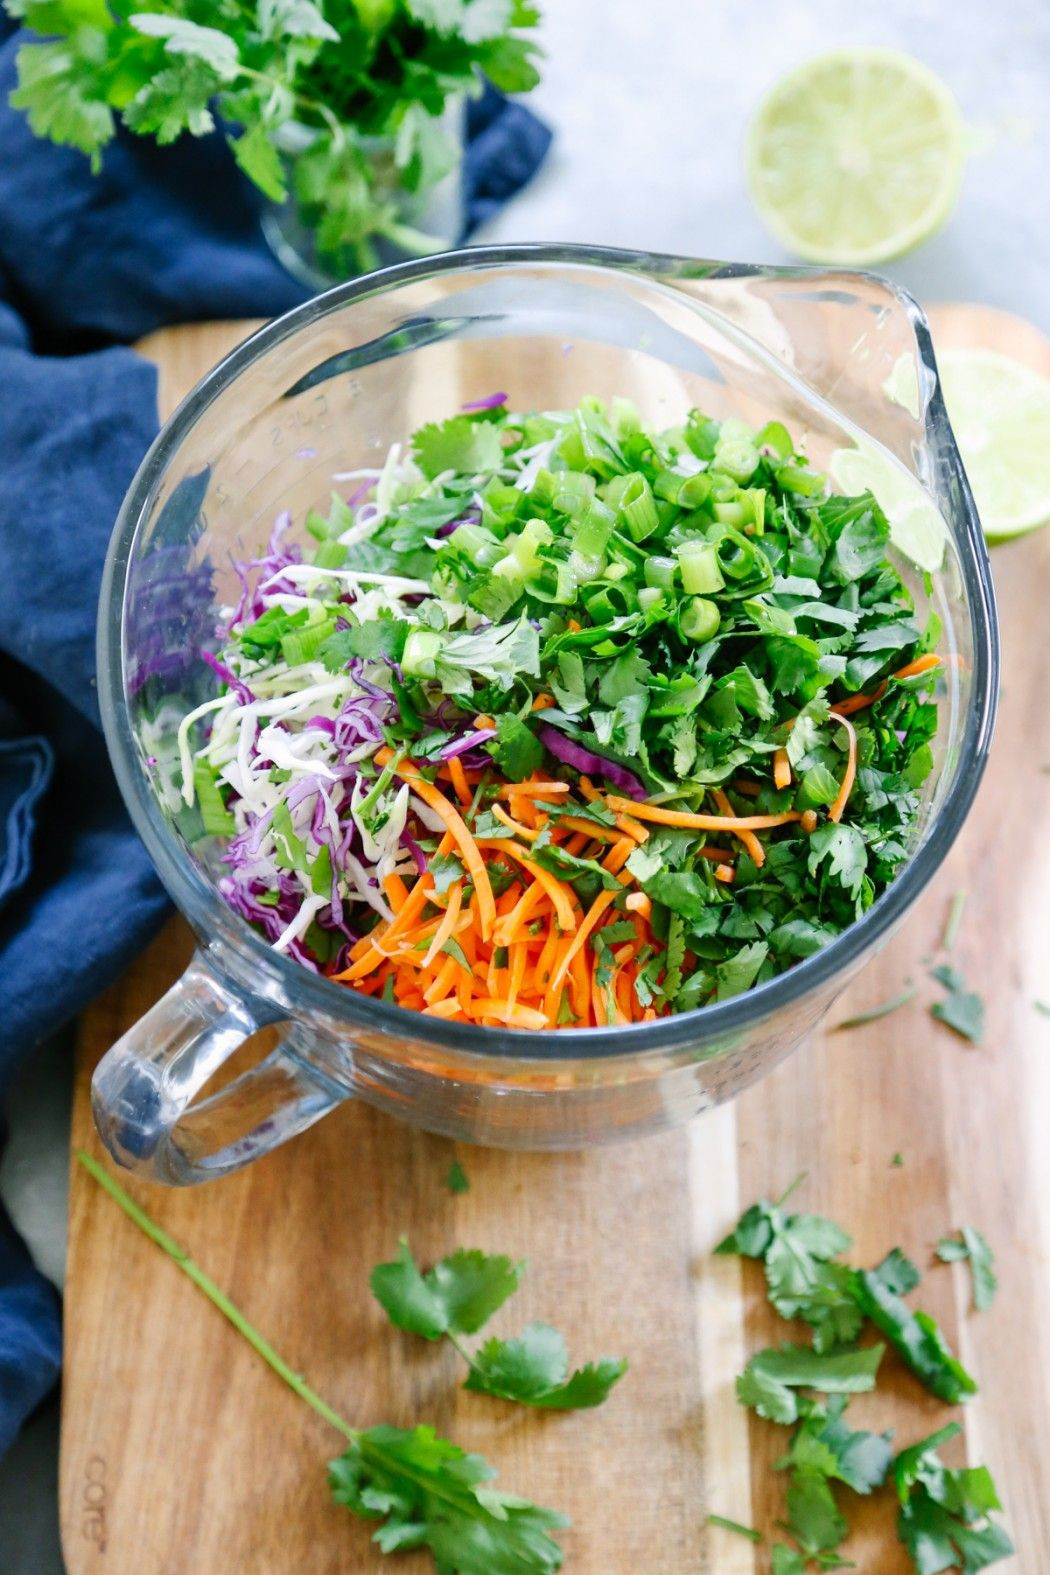 Healthy Side Dishes For Sandwiches
 Cilantro Lime Coleslaw Recipe